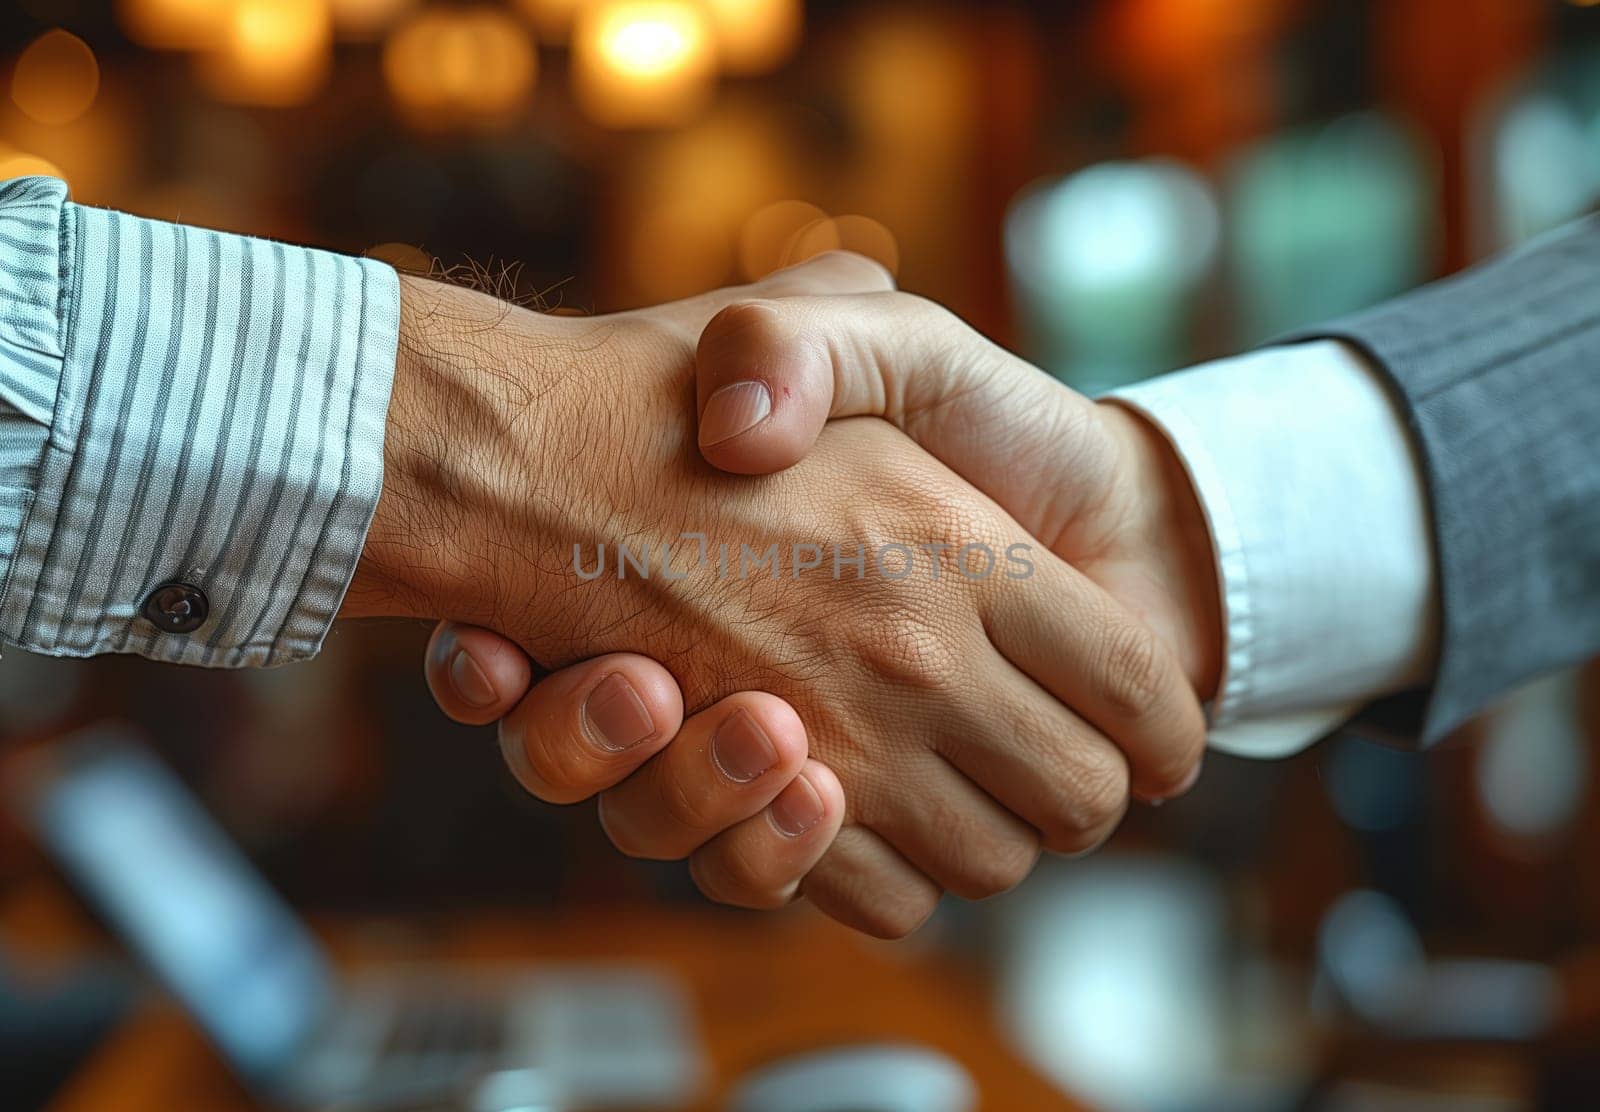 Two individuals are exchanging a handshake across a table as a formal gesture of greeting during an event, showcasing their hands, fingers, thumbs, nails, and wrists in formal wear